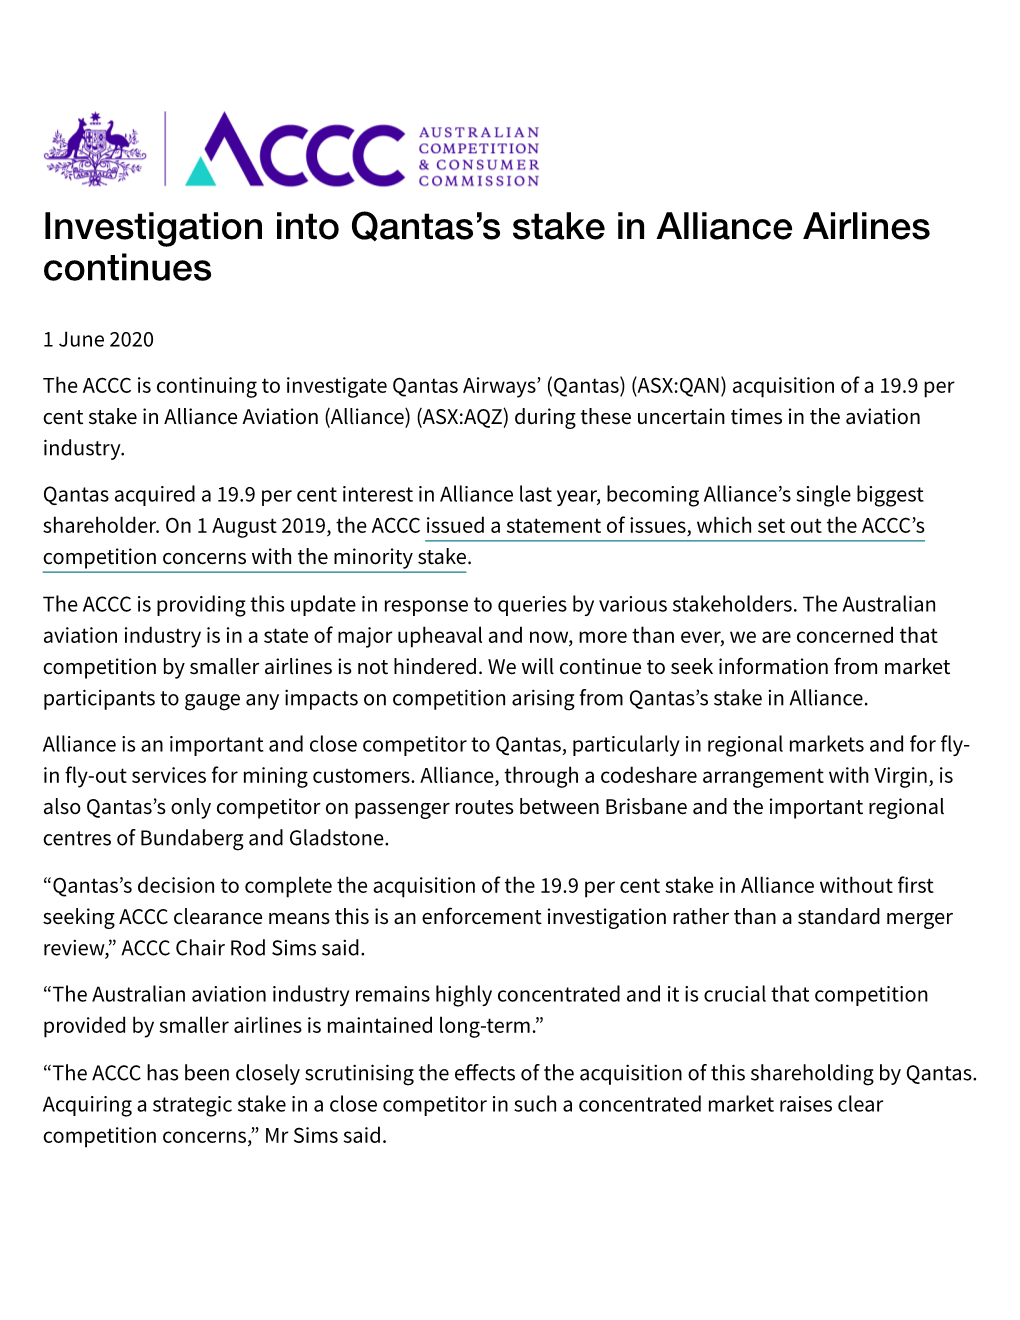 Investigation Into Qantas's Stake in Alliance Airlines Continues